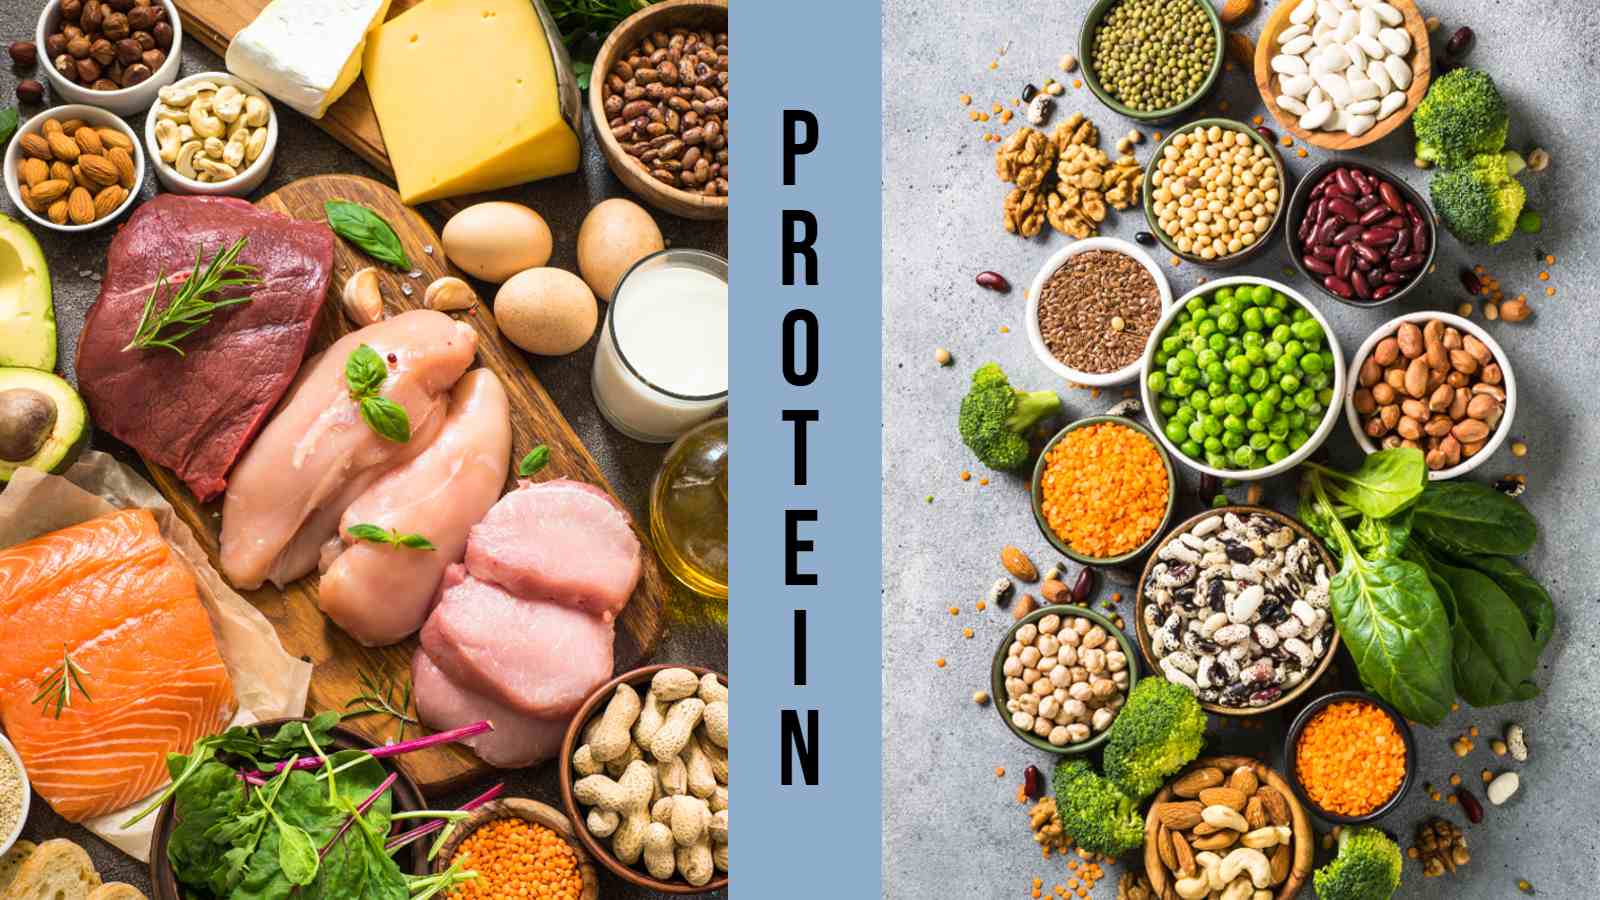 Animal protein vs plant protein: Which is better?